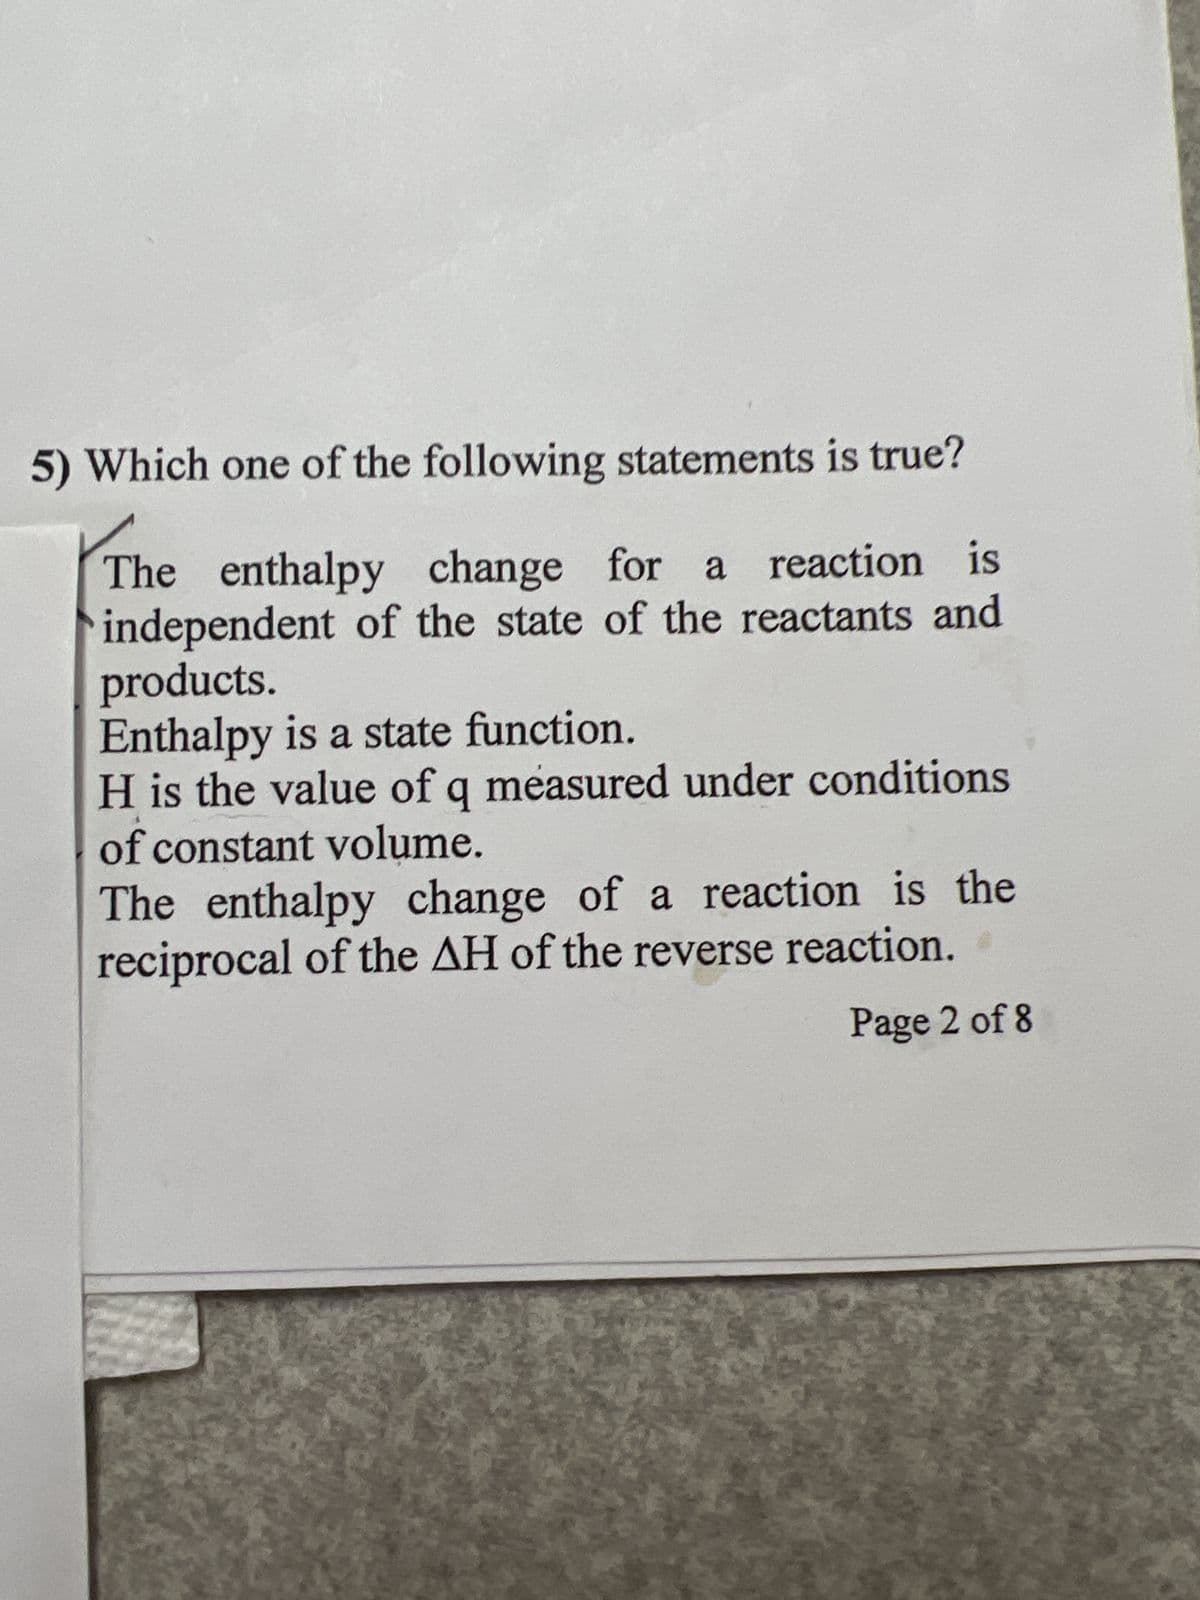 5) Which one of the following statements is true?
The enthalpy change for a reaction is
independent of the state of the reactants and
products.
Enthalpy is a state function.
H is the value of q measured under conditions
of constant volume.
The enthalpy change of a reaction is the
reciprocal of the AH of the reverse reaction.
Page 2 of 8